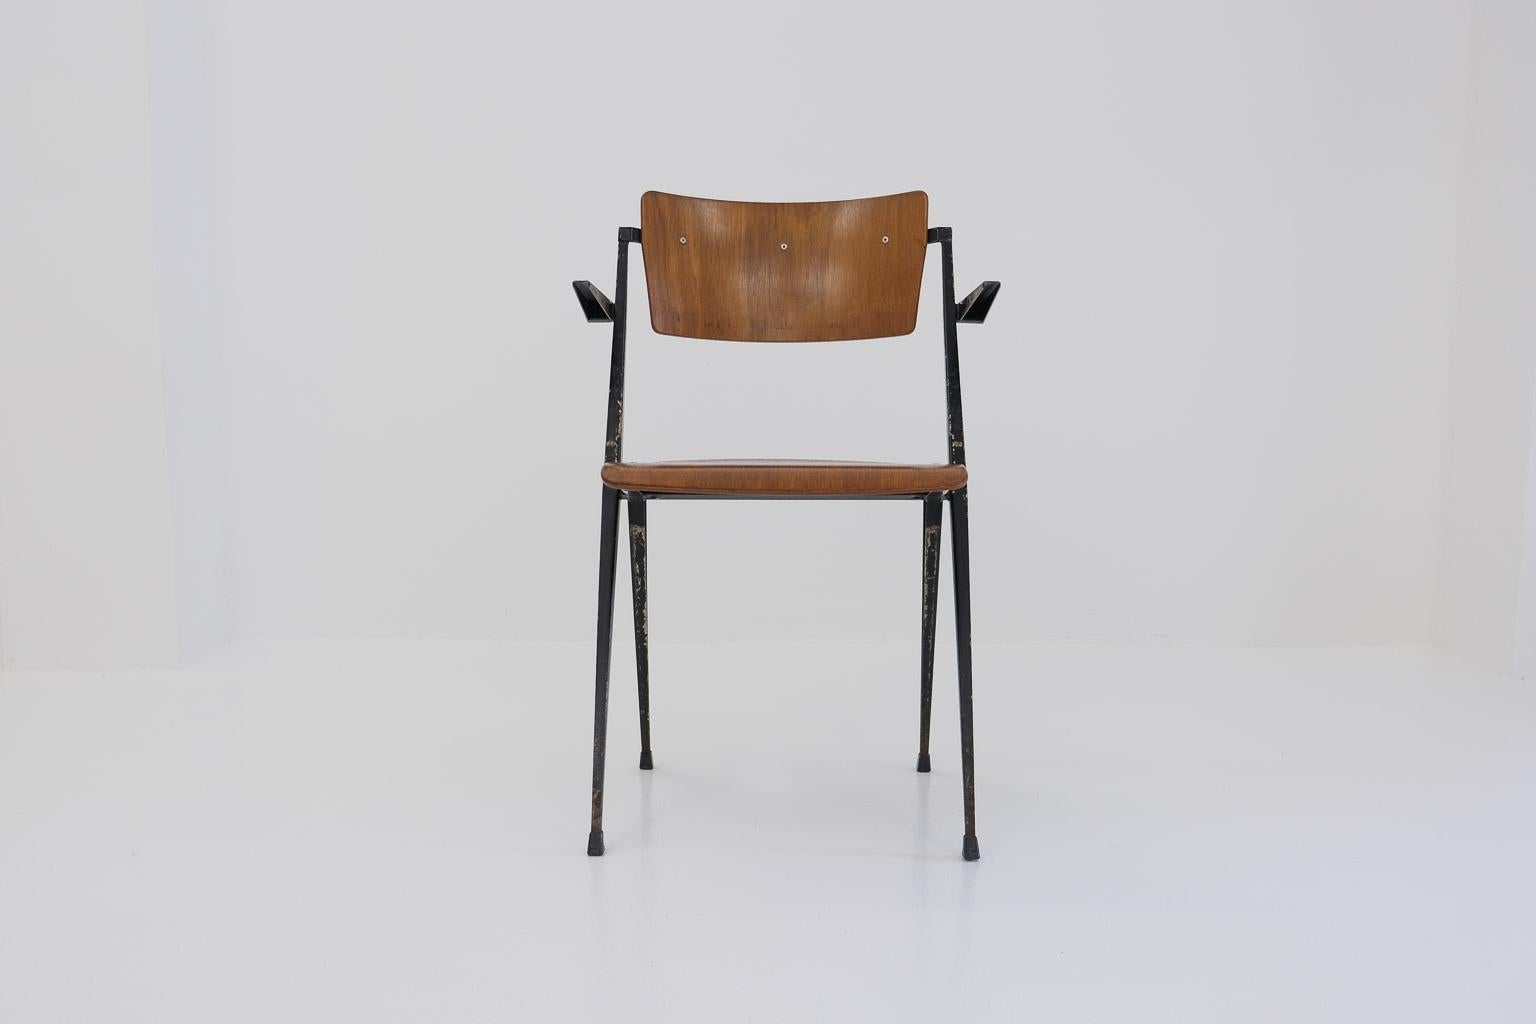 20th Century Early Pyramid Arm Chair by Wim Rietveld for Ahrend de Cirkel from Feb. 1964 For Sale